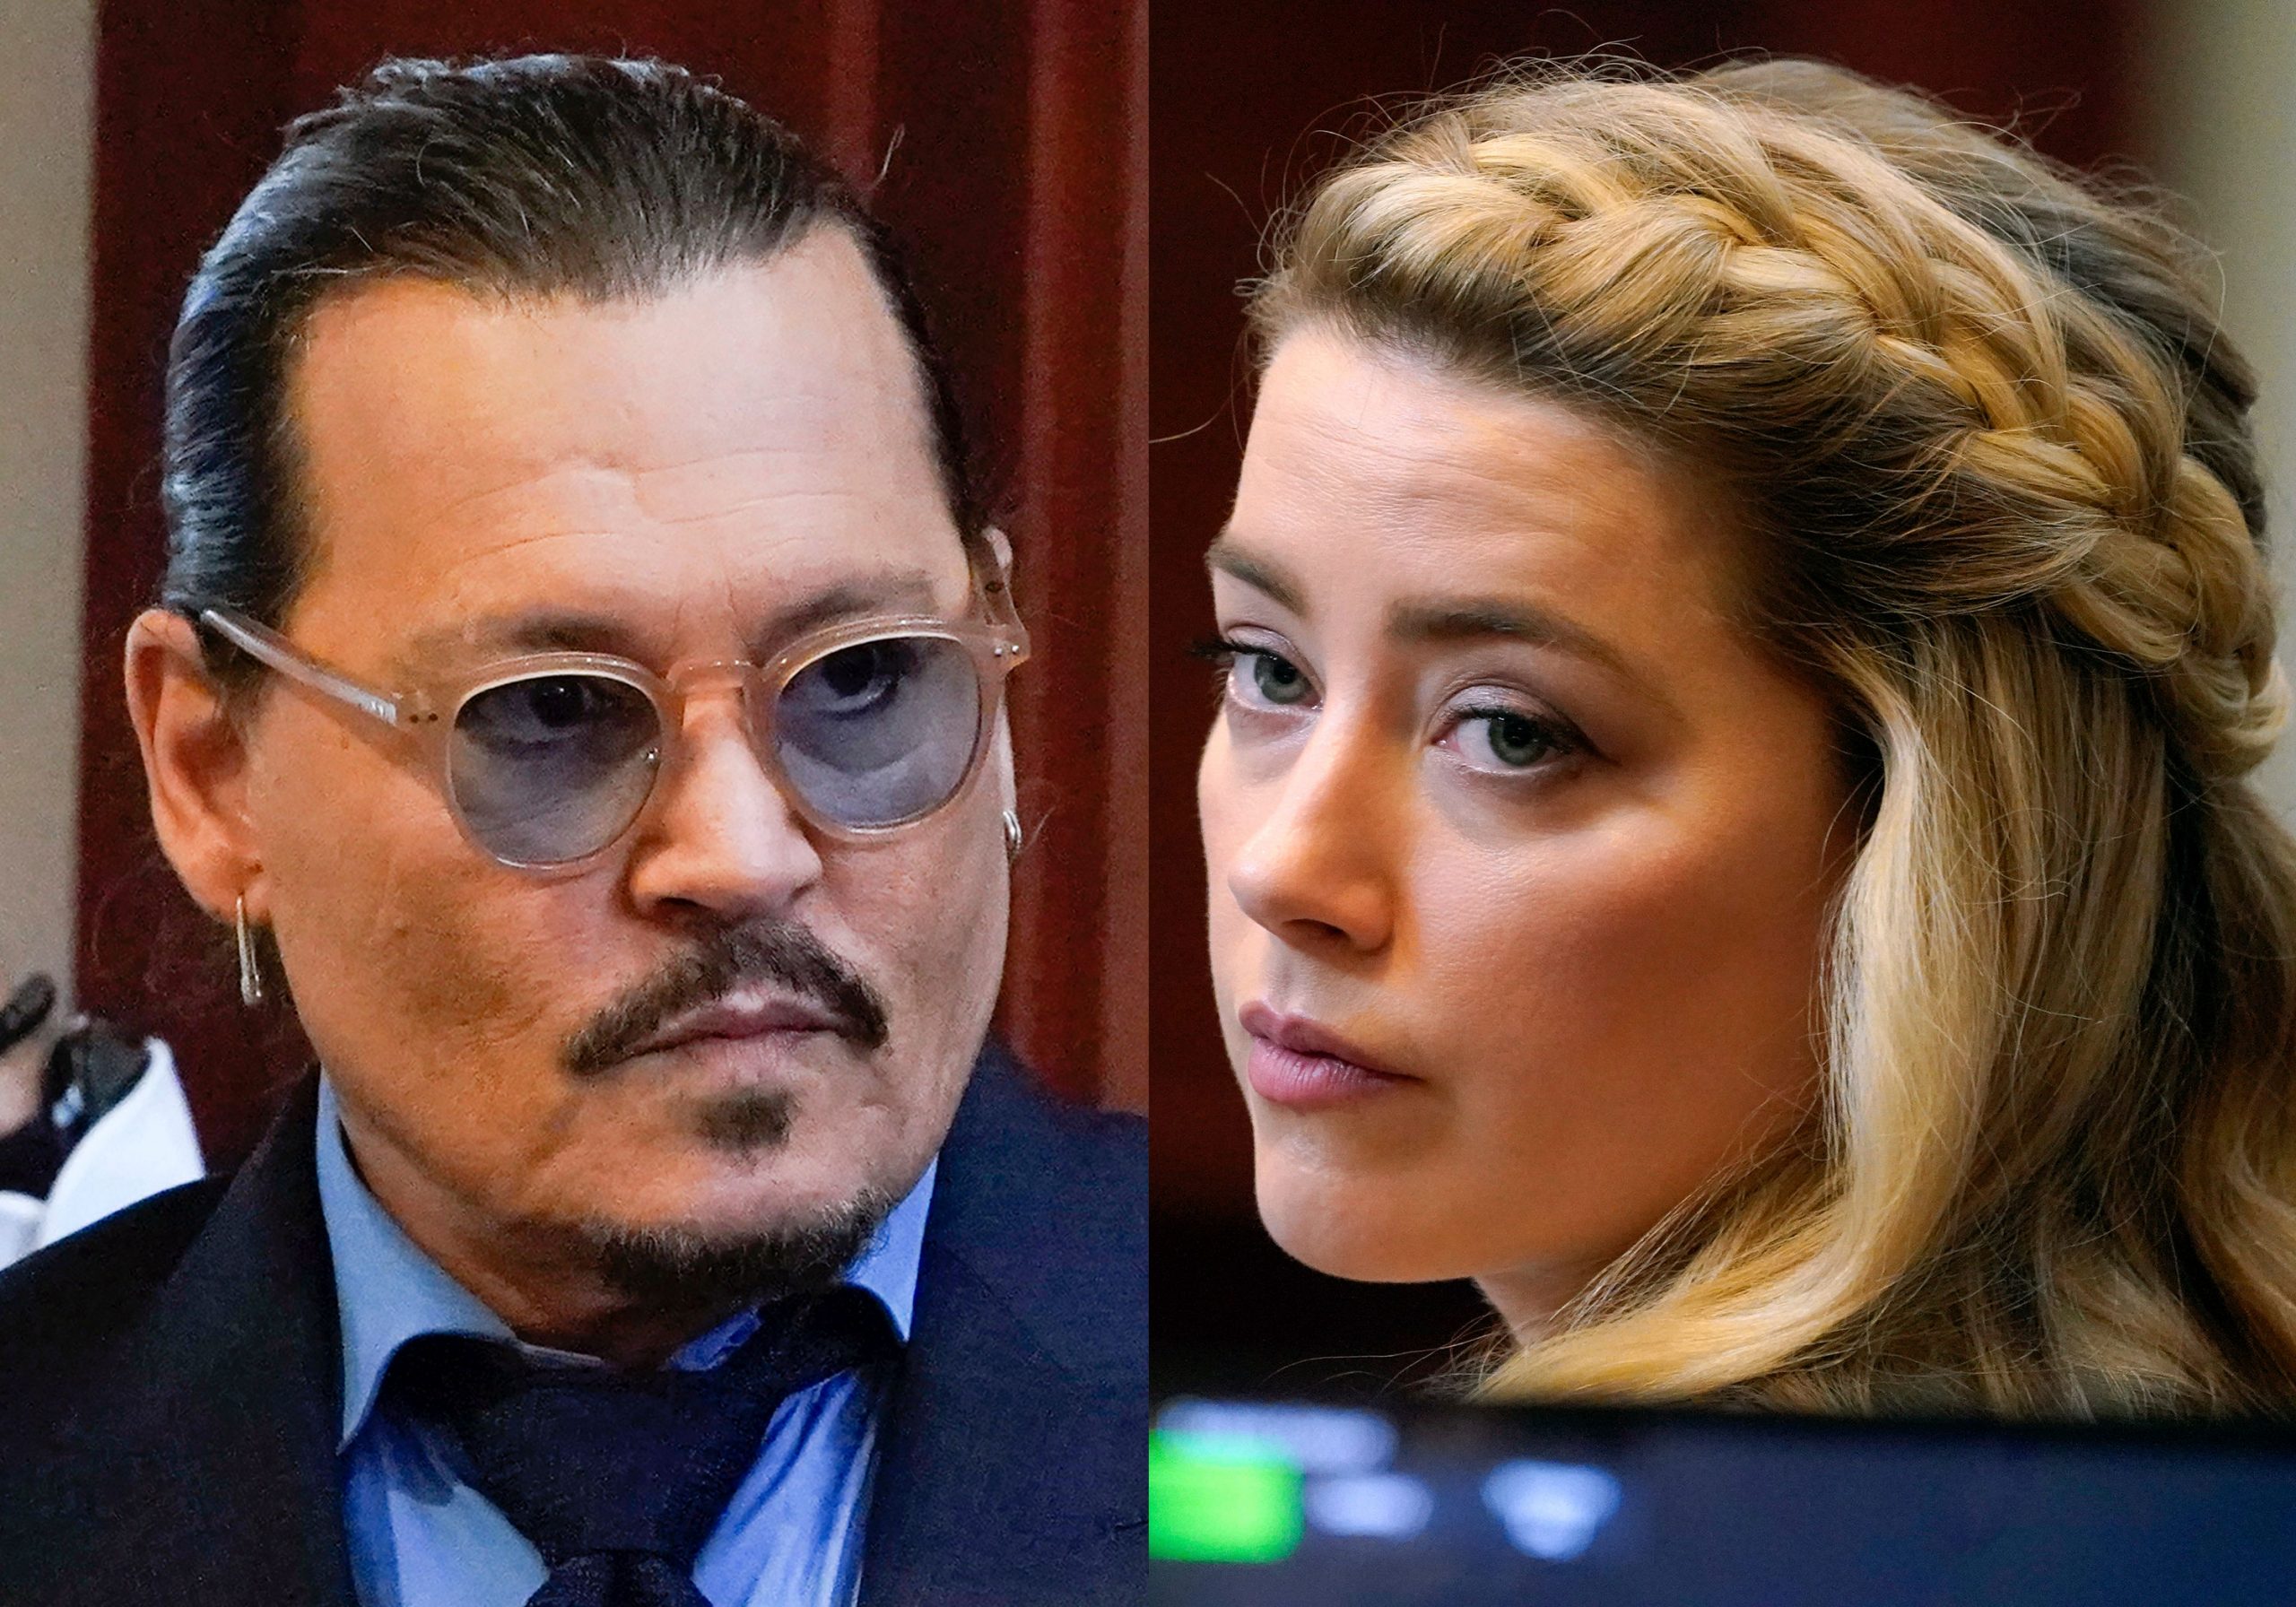 Johnny Depp pleased with Amber Heard’s $1 million defamation case settlement, will donate amount to charity